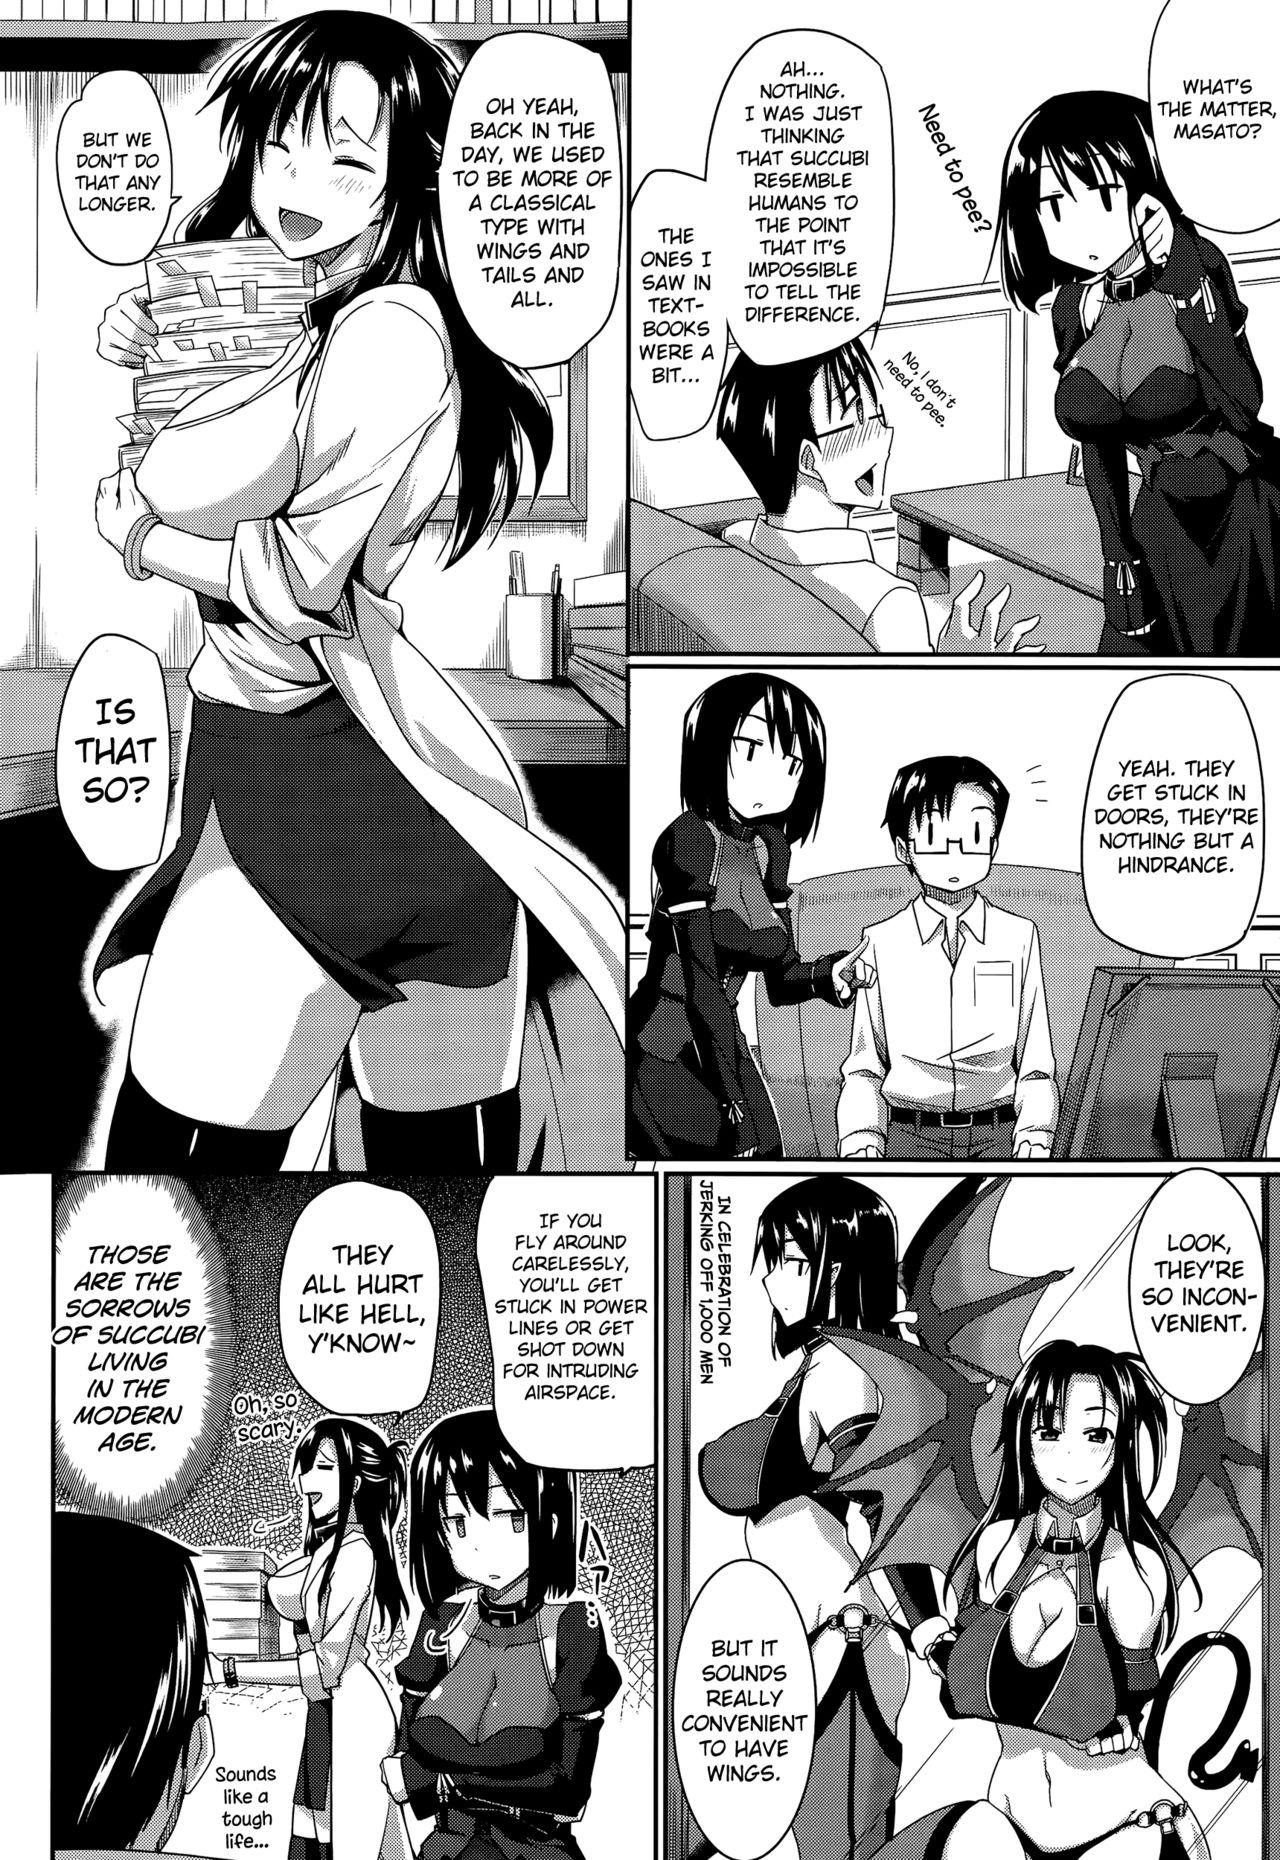 Oil Inma no Mikata! | Succubi's Supporter! Ch. 1-4 Hooker - Page 4